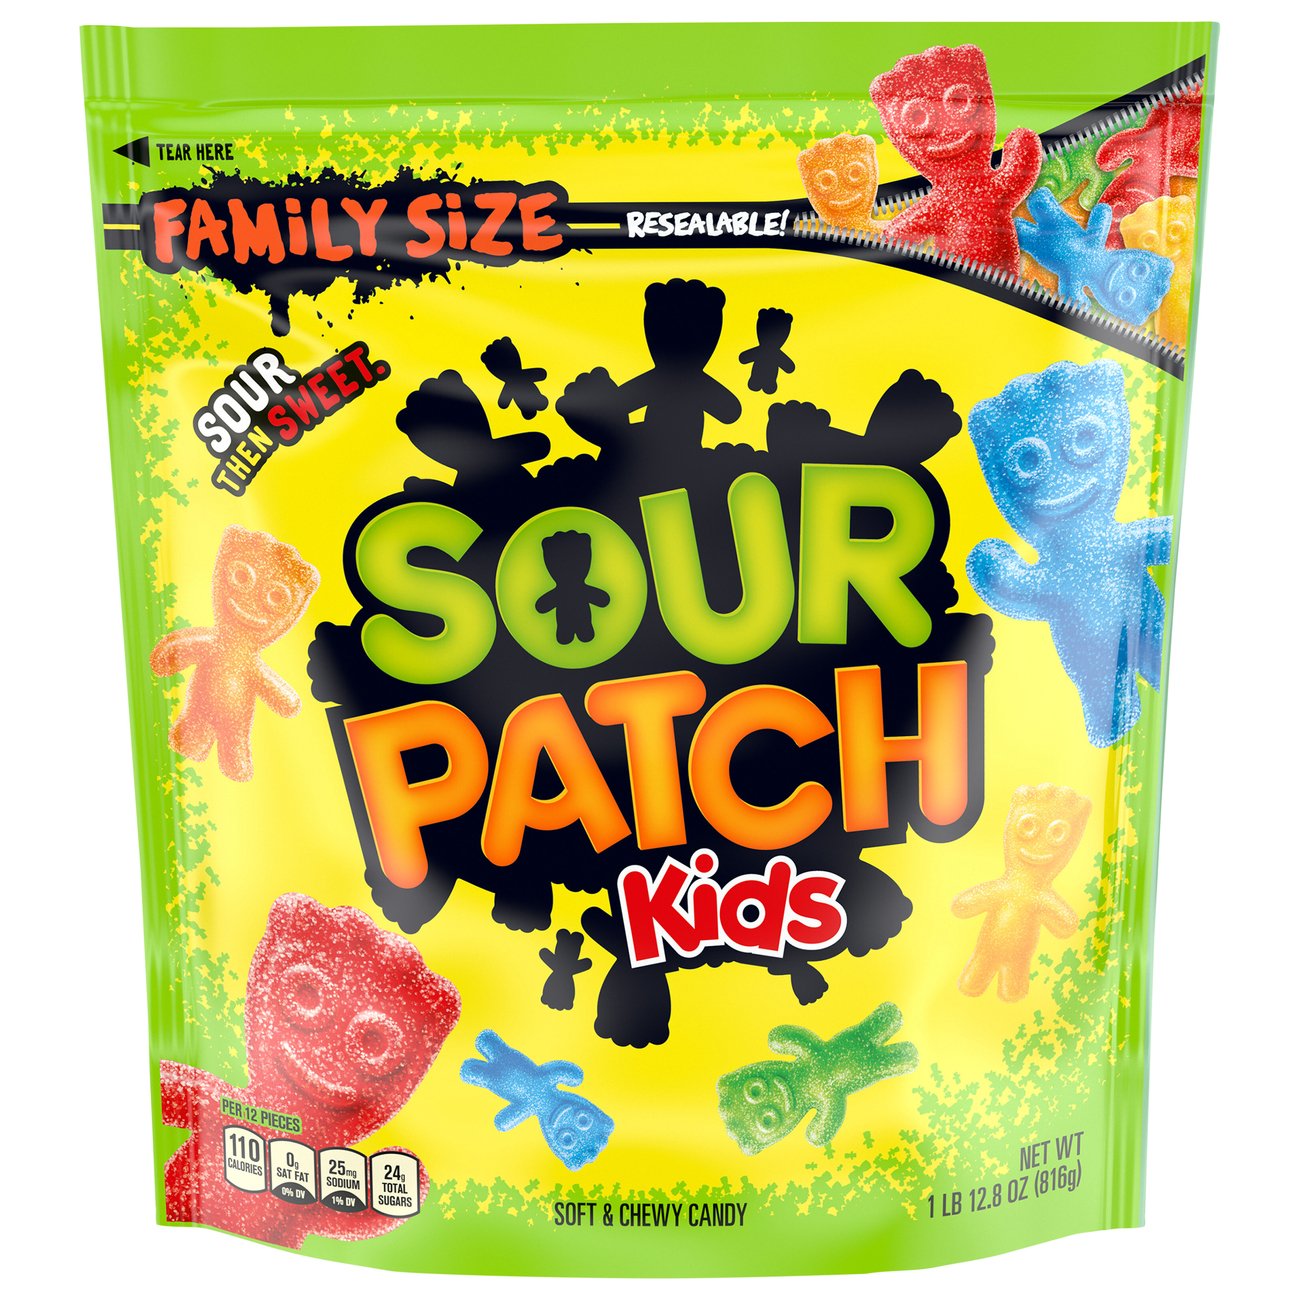 Sour Patch Kids Soft & Chewy Candy, 2 oz, 24-count